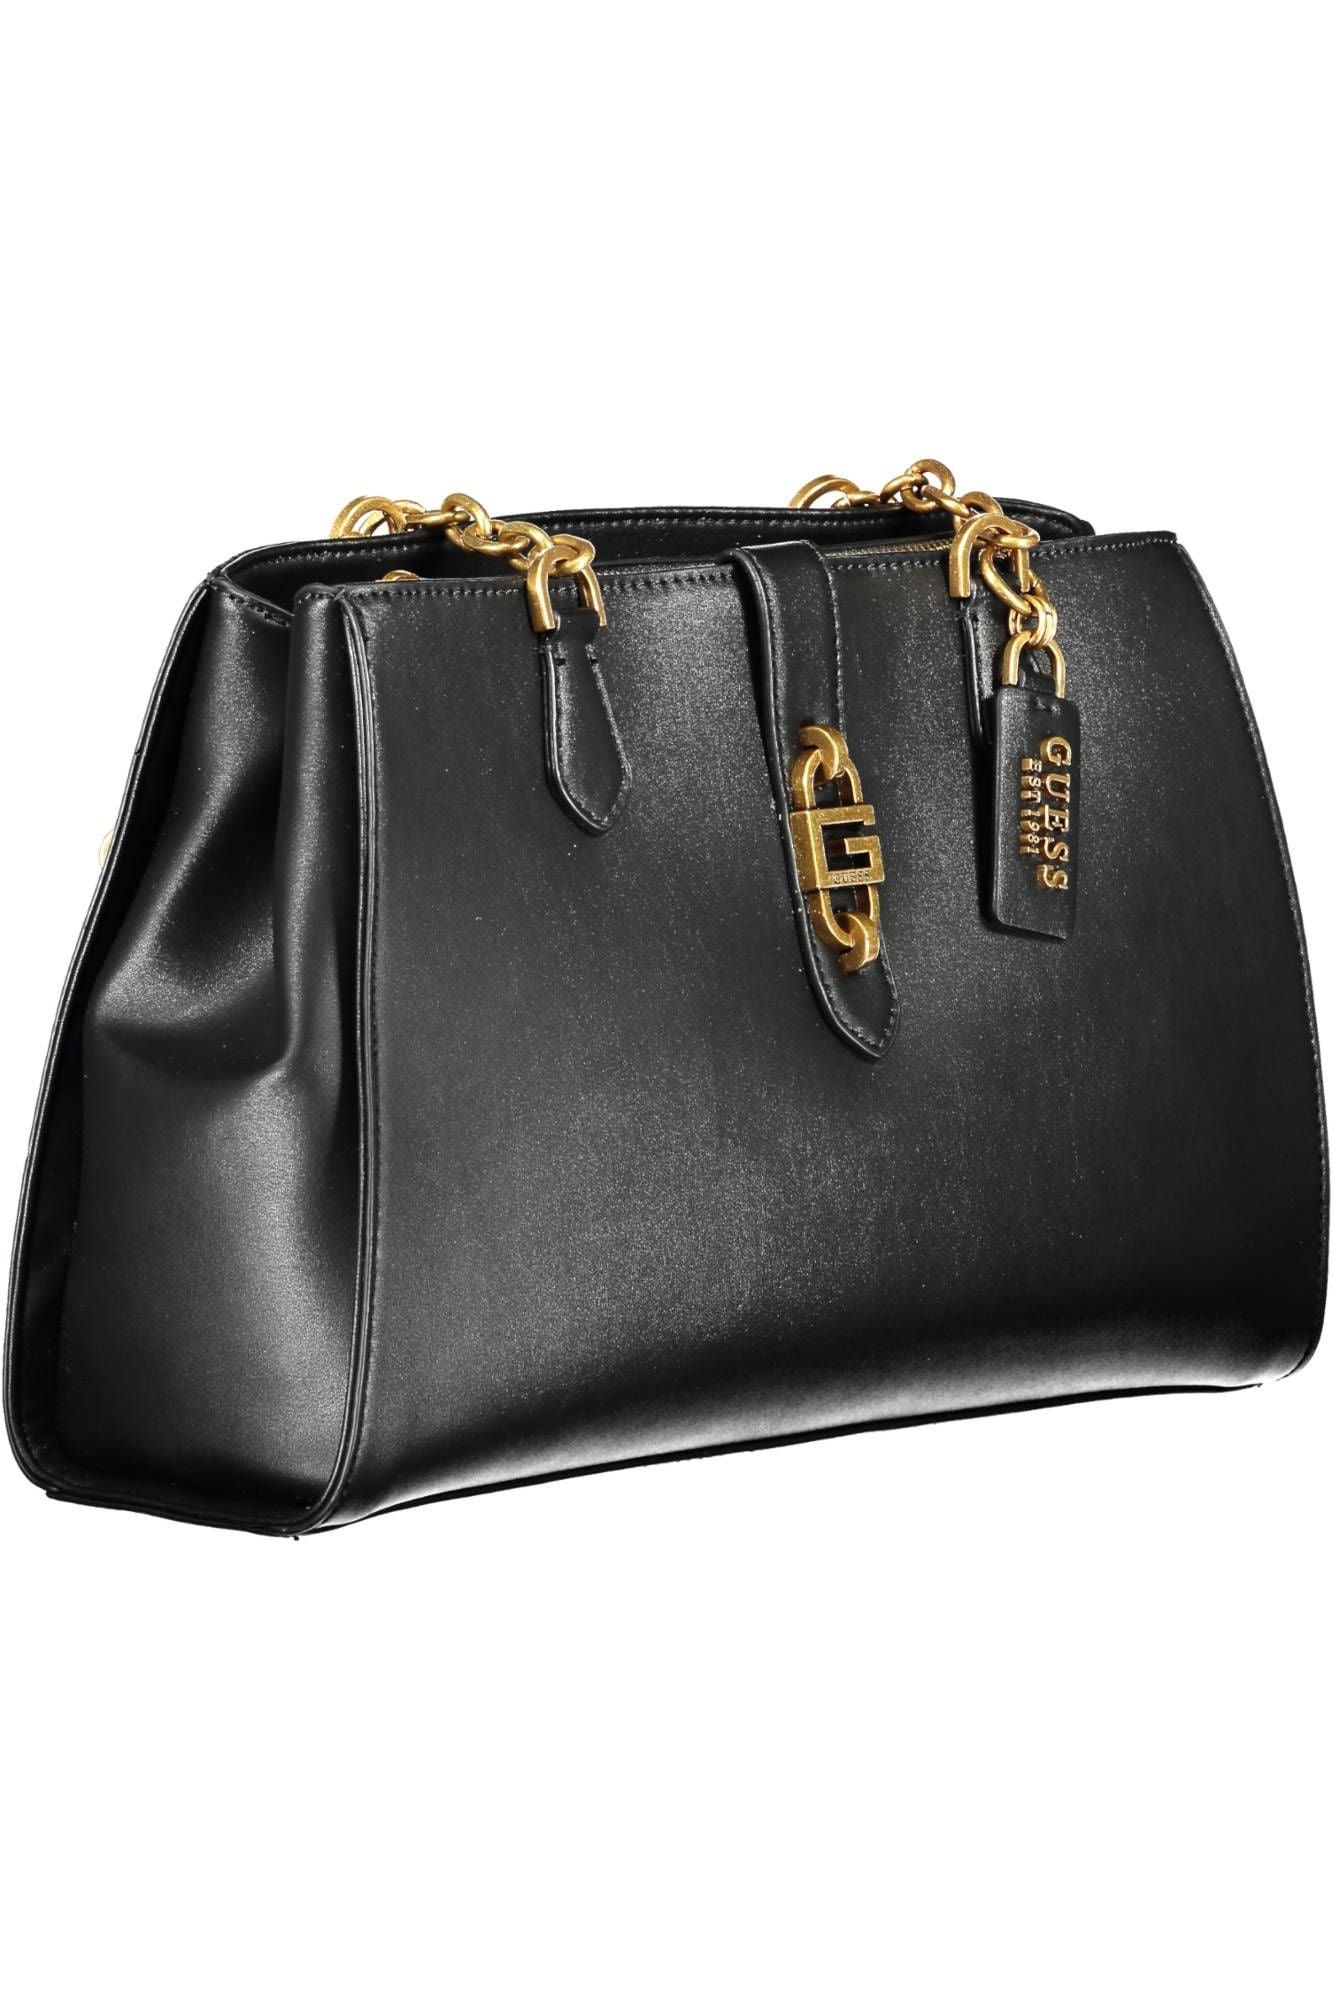 Guess Jeans Chic Black Polyurethane Satchel with Contrasting Details - PER.FASHION